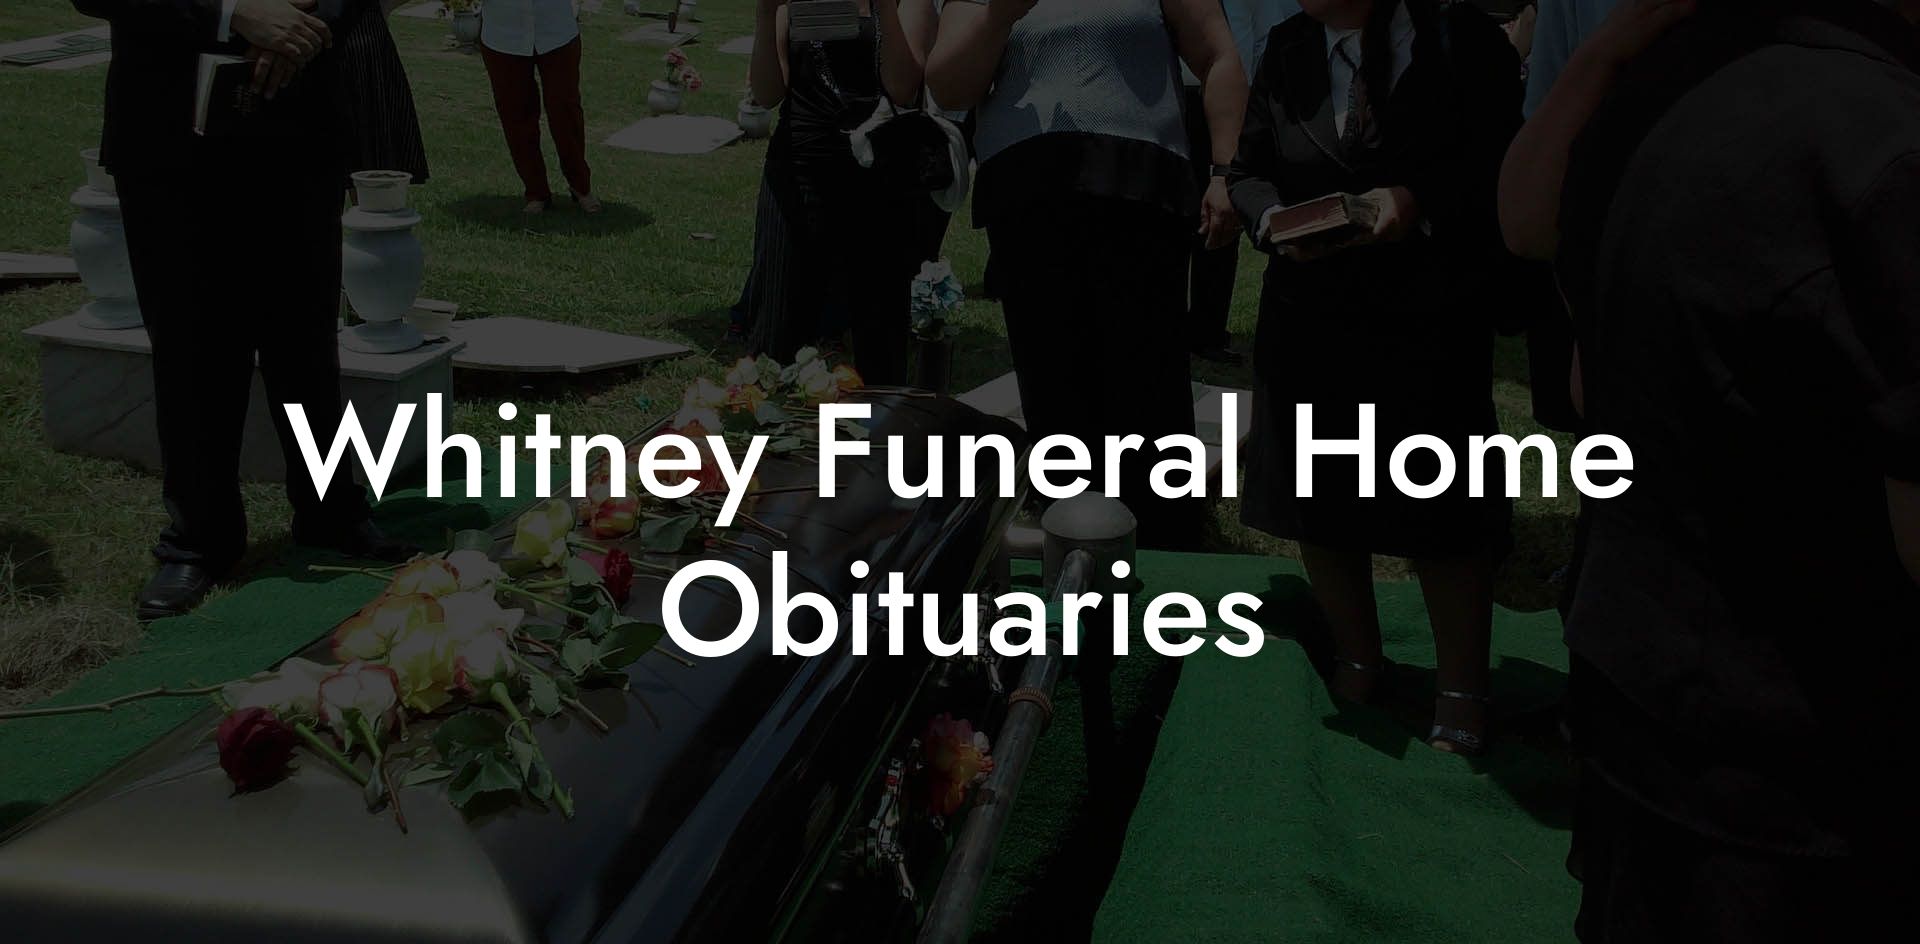 Whitney Funeral Home Obituaries